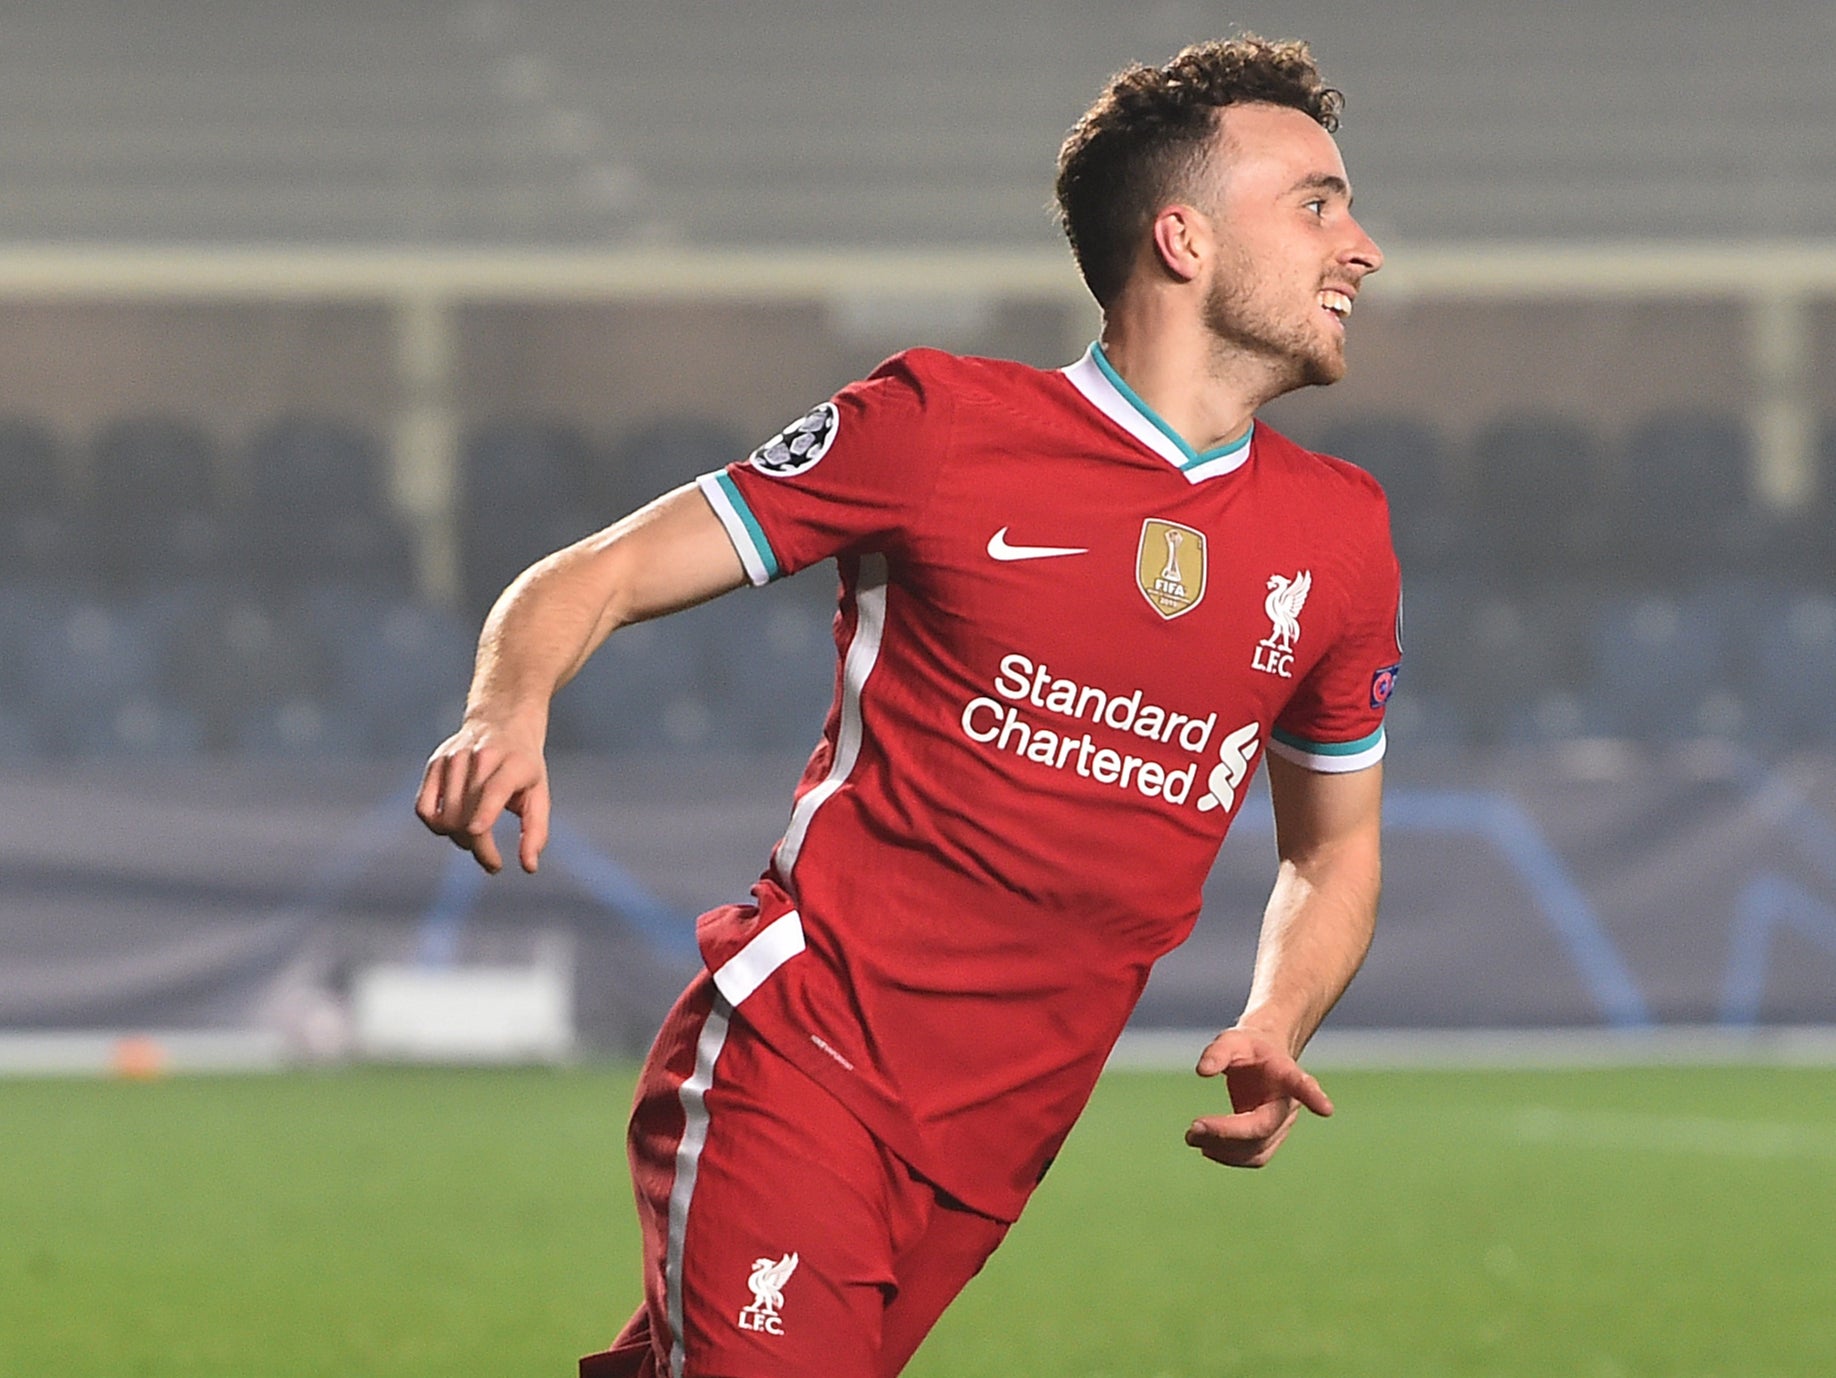 Diogo Jota scored a hat-trick for Liverpool